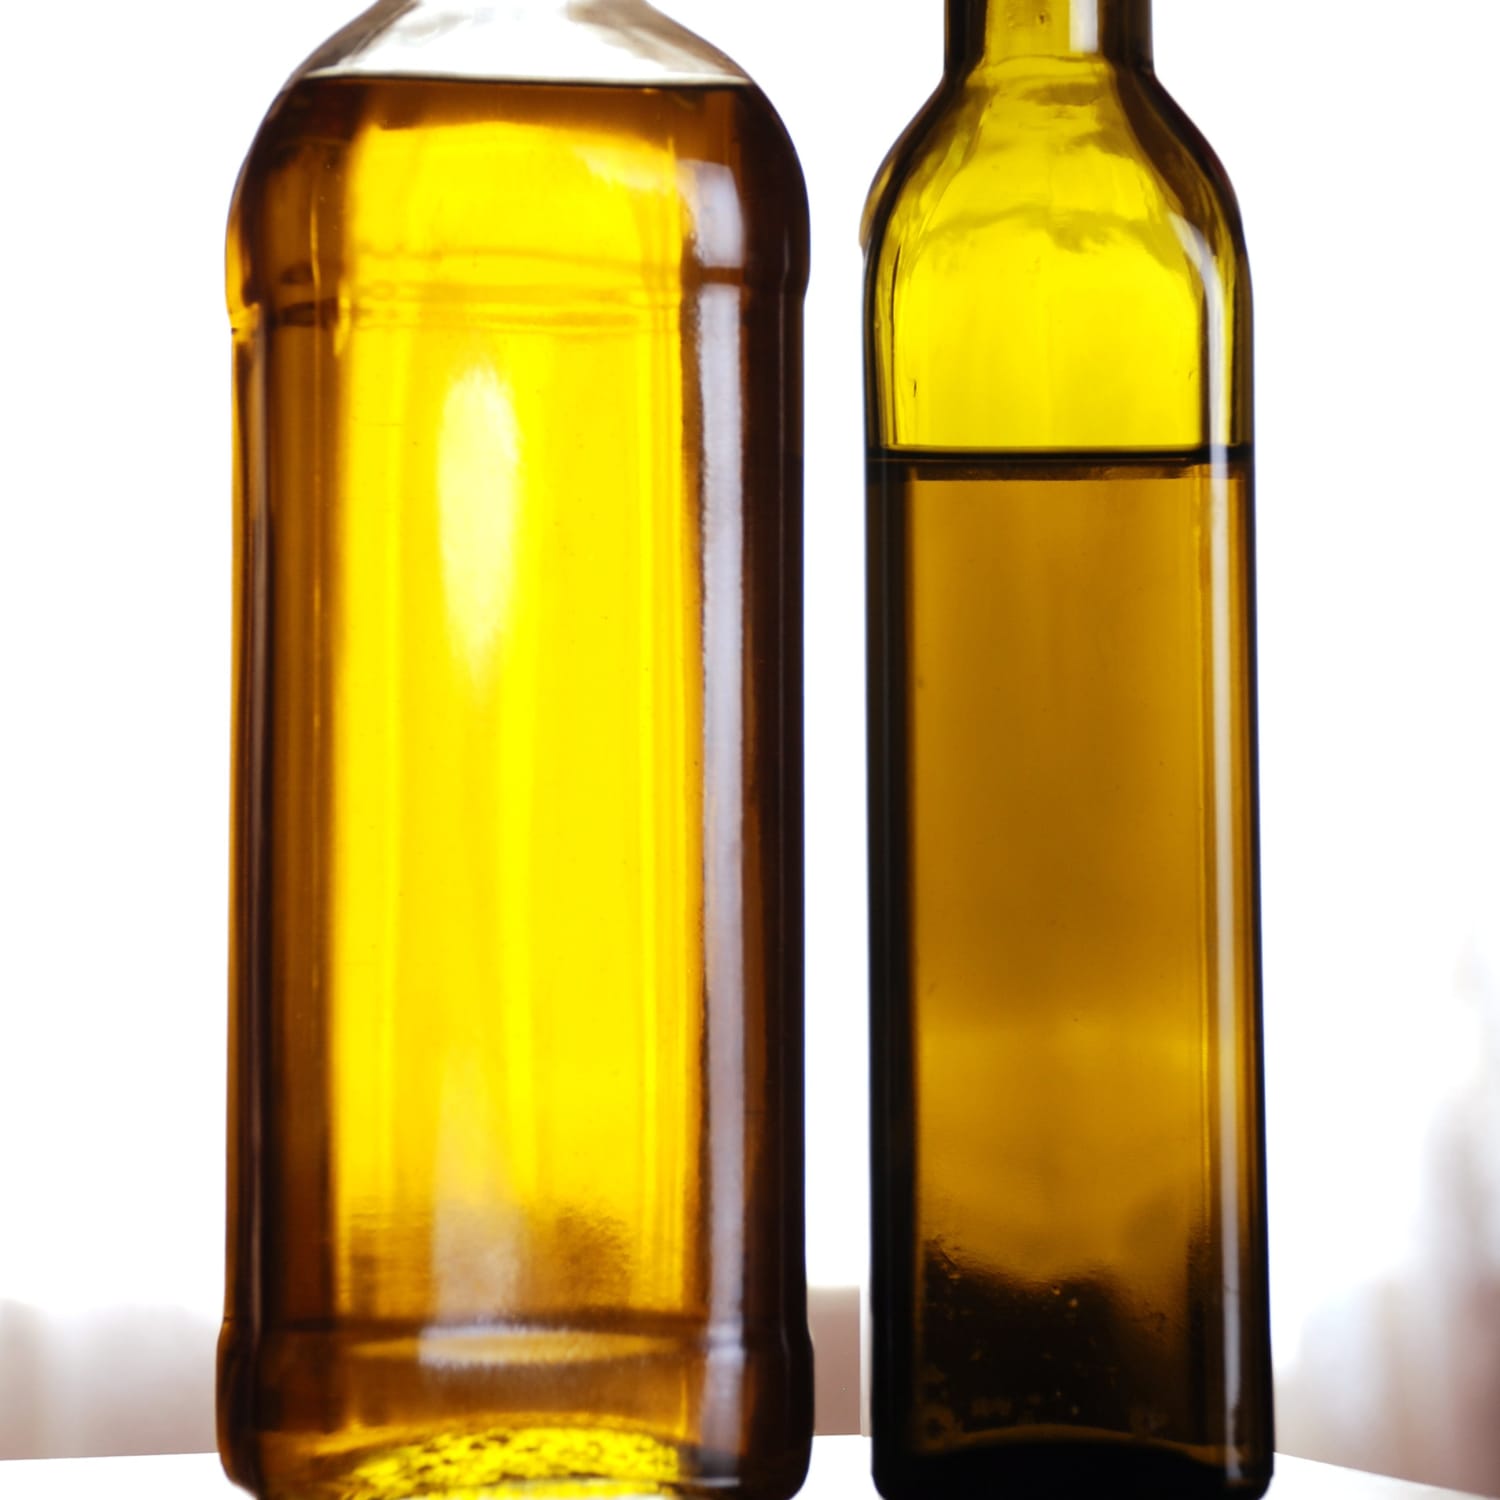 Let's All Agree That Olive Oil Belongs in a Squeeze Bottle